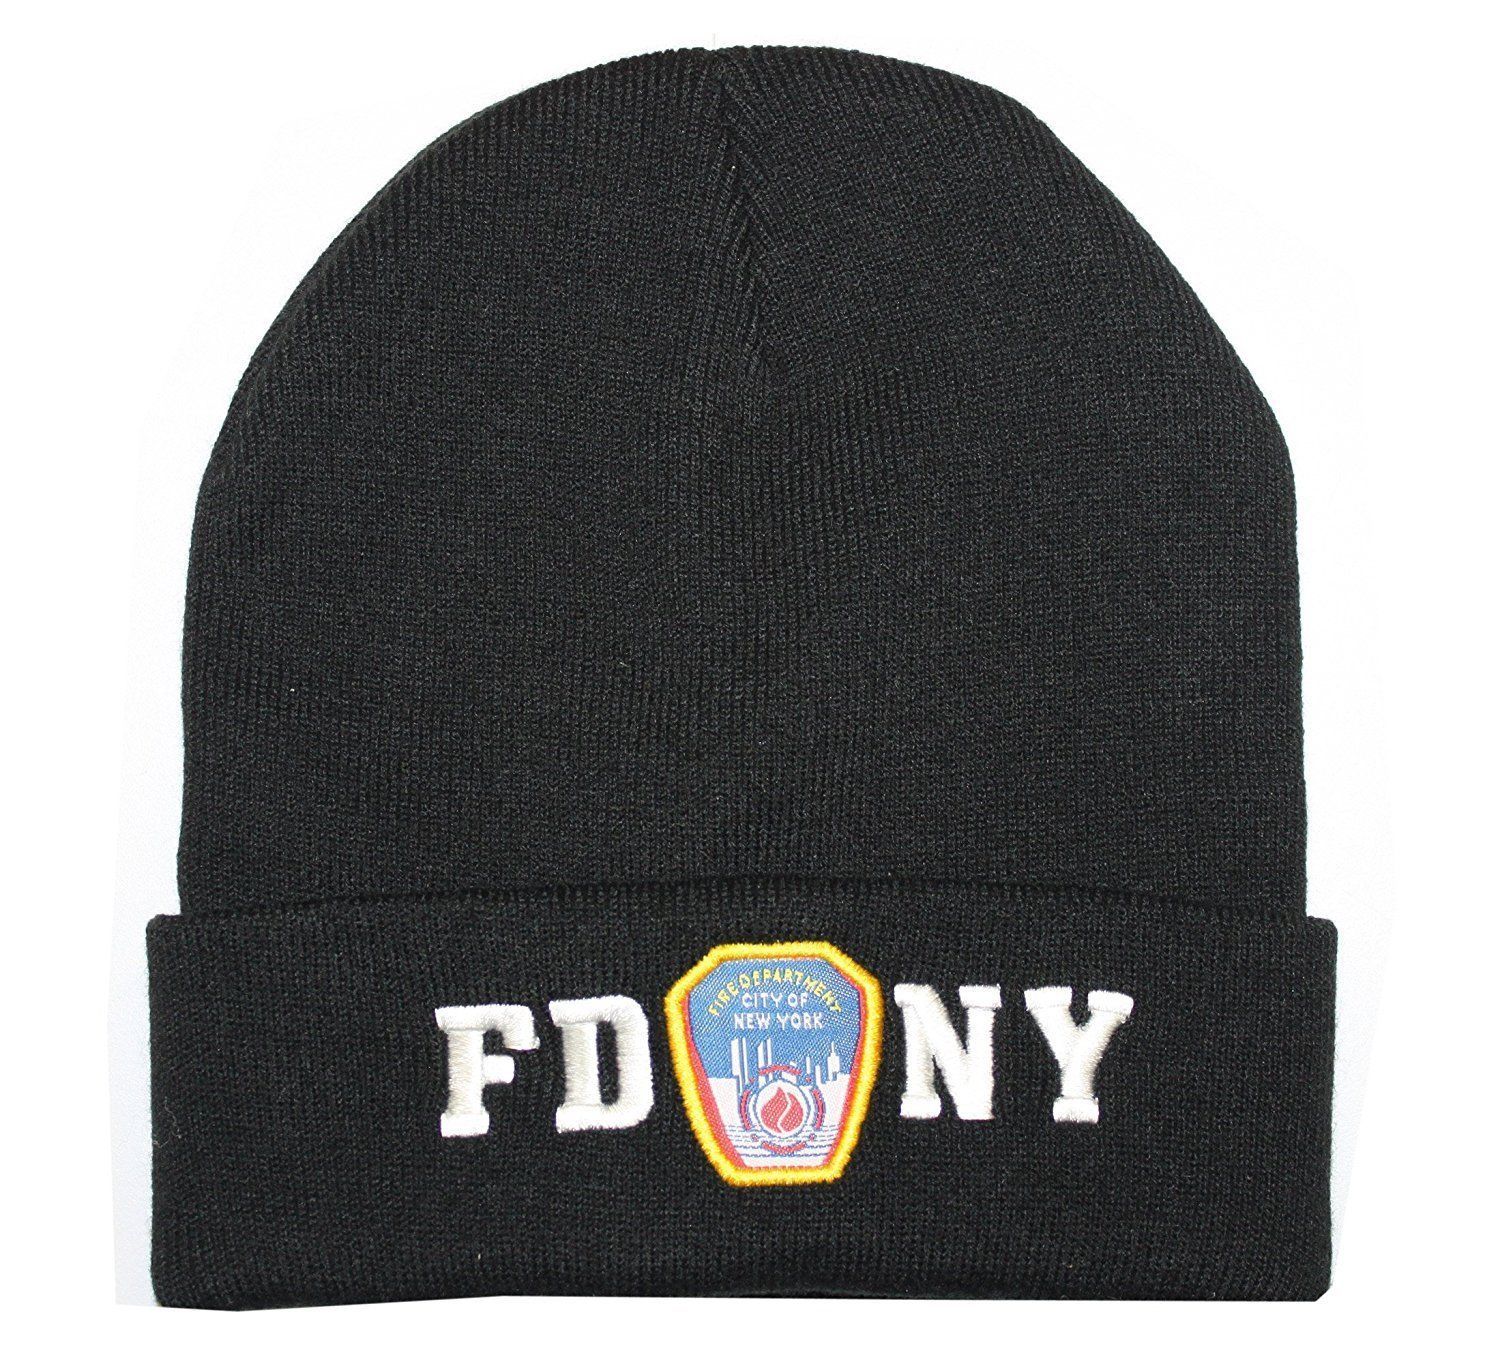 FDNY Winter Hat Police Badge Fire Department Of New York City Black & White O... - $13.98